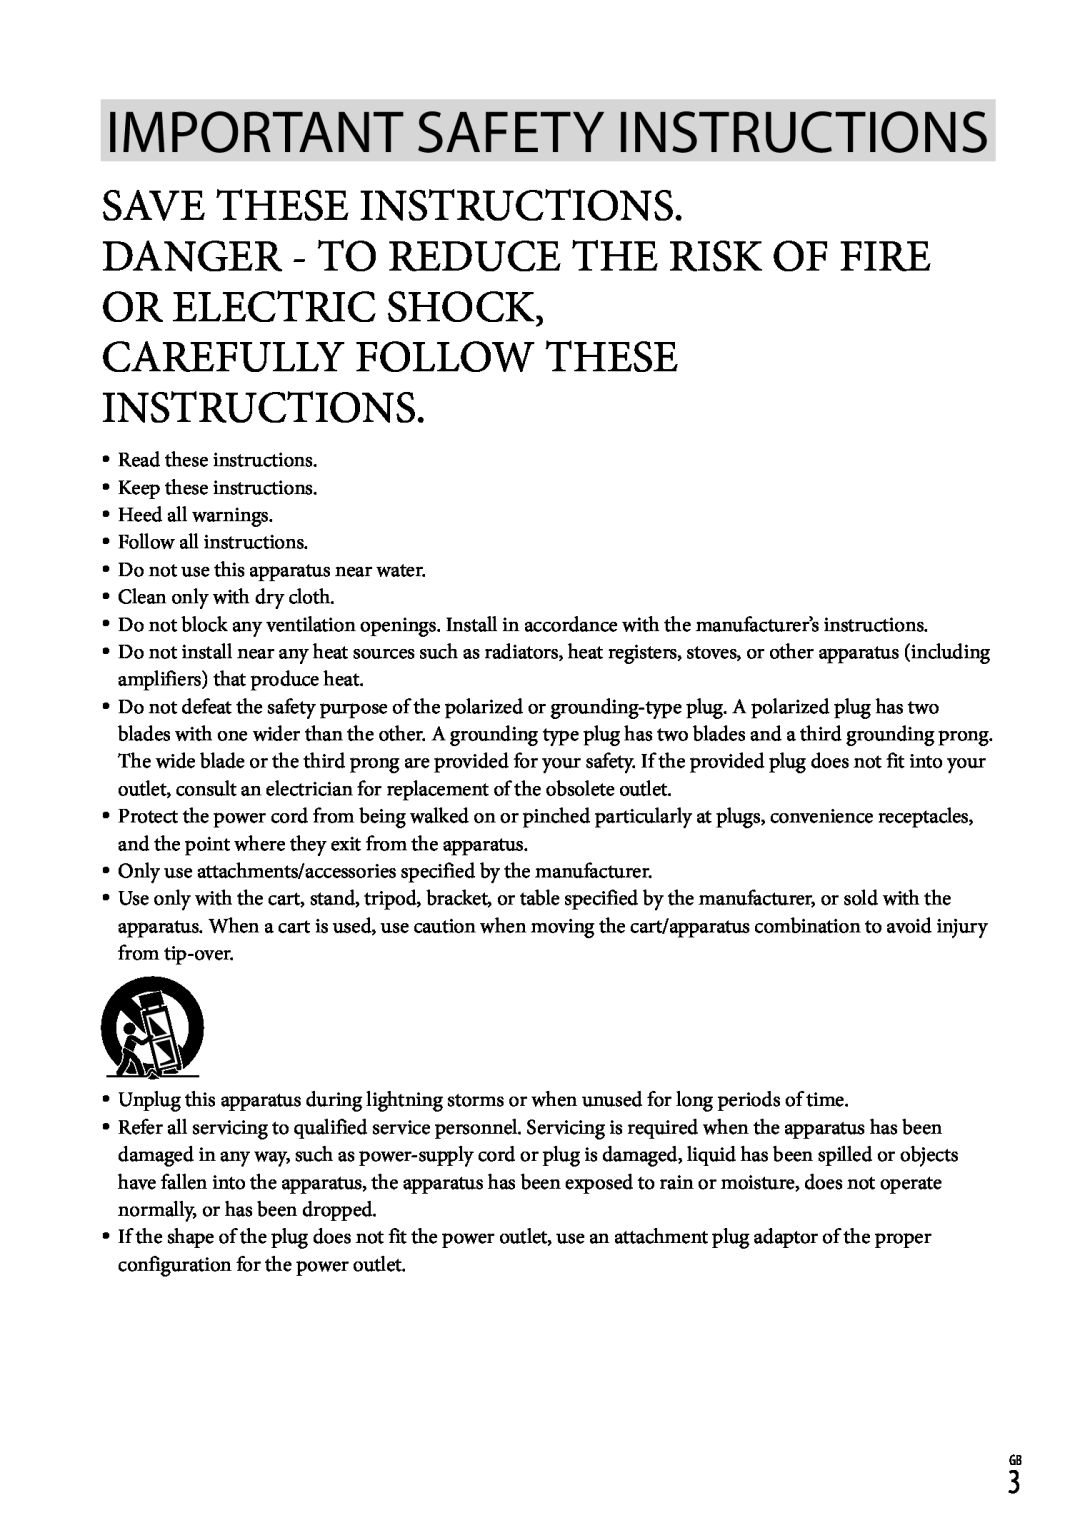 Sony PJ220 Important Safety Instructions, Save These Instructions, Danger - To Reduce The Risk Of Fire Or Electric Shock 